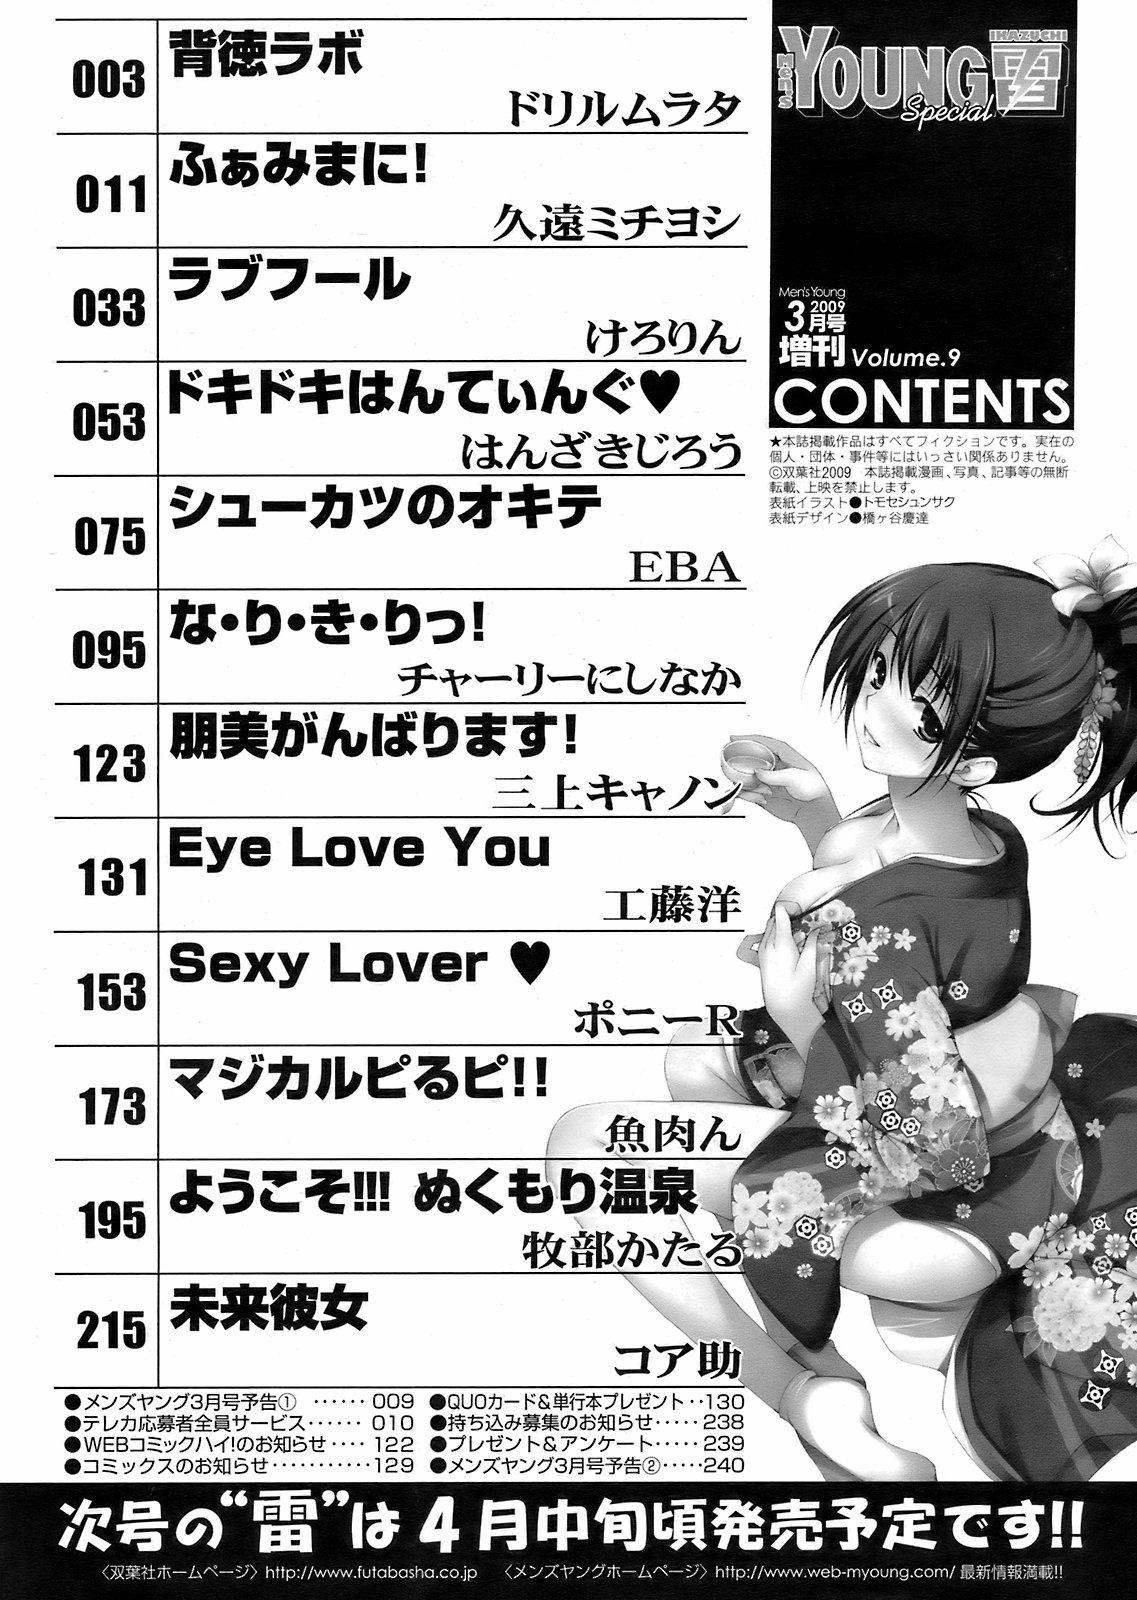 Defloration Men's Young Special IKAZUCHI 2009-03 Vol. 09 Foda - Page 241